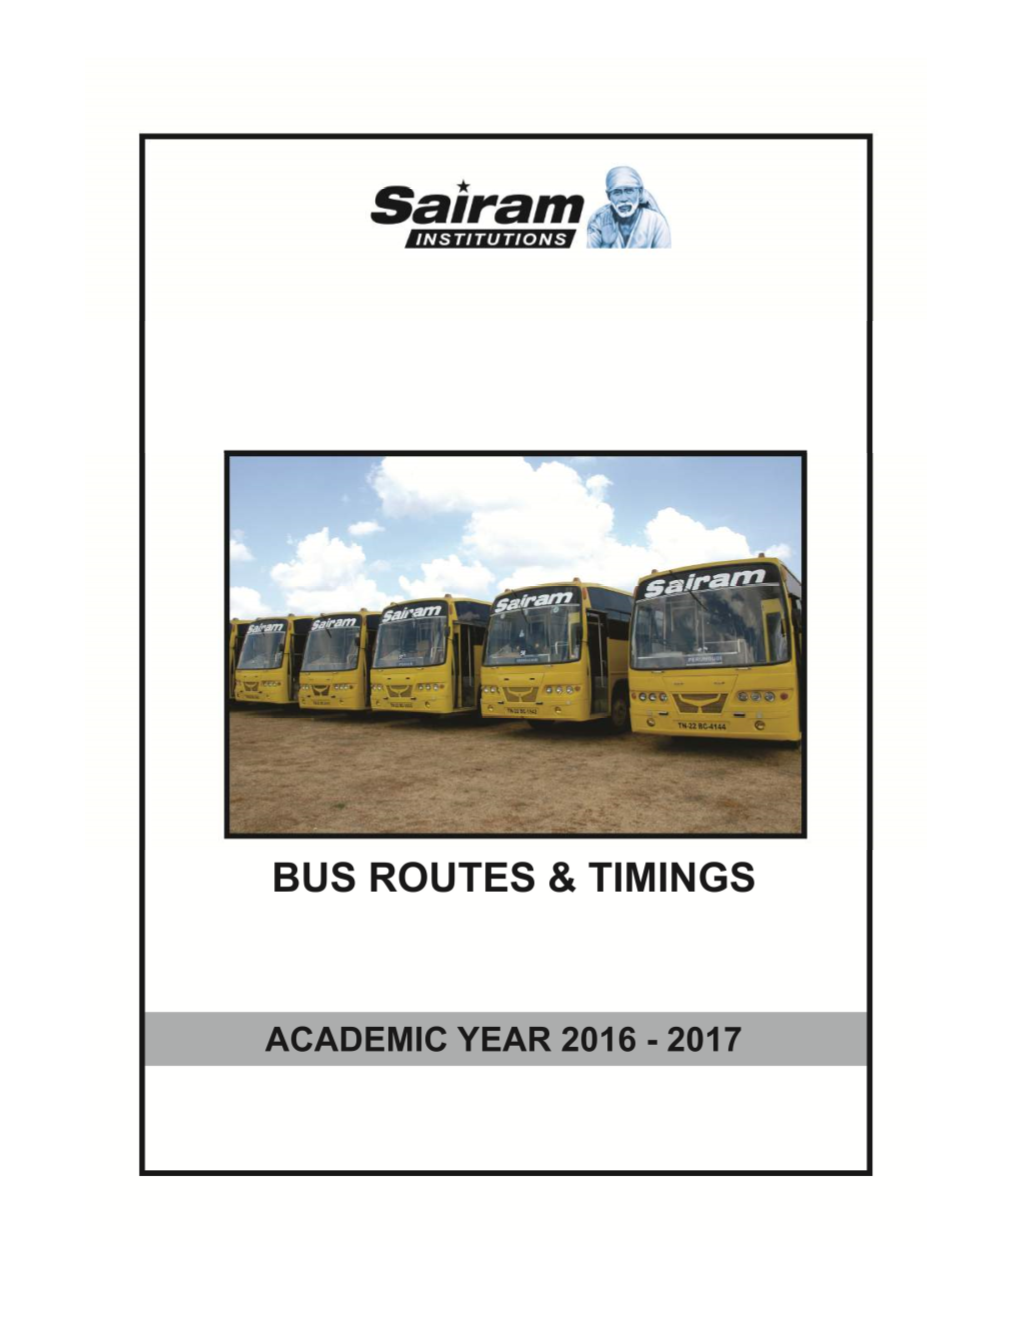 Check the Bus Routes & Timings for Academic Year 2015-2016 Click